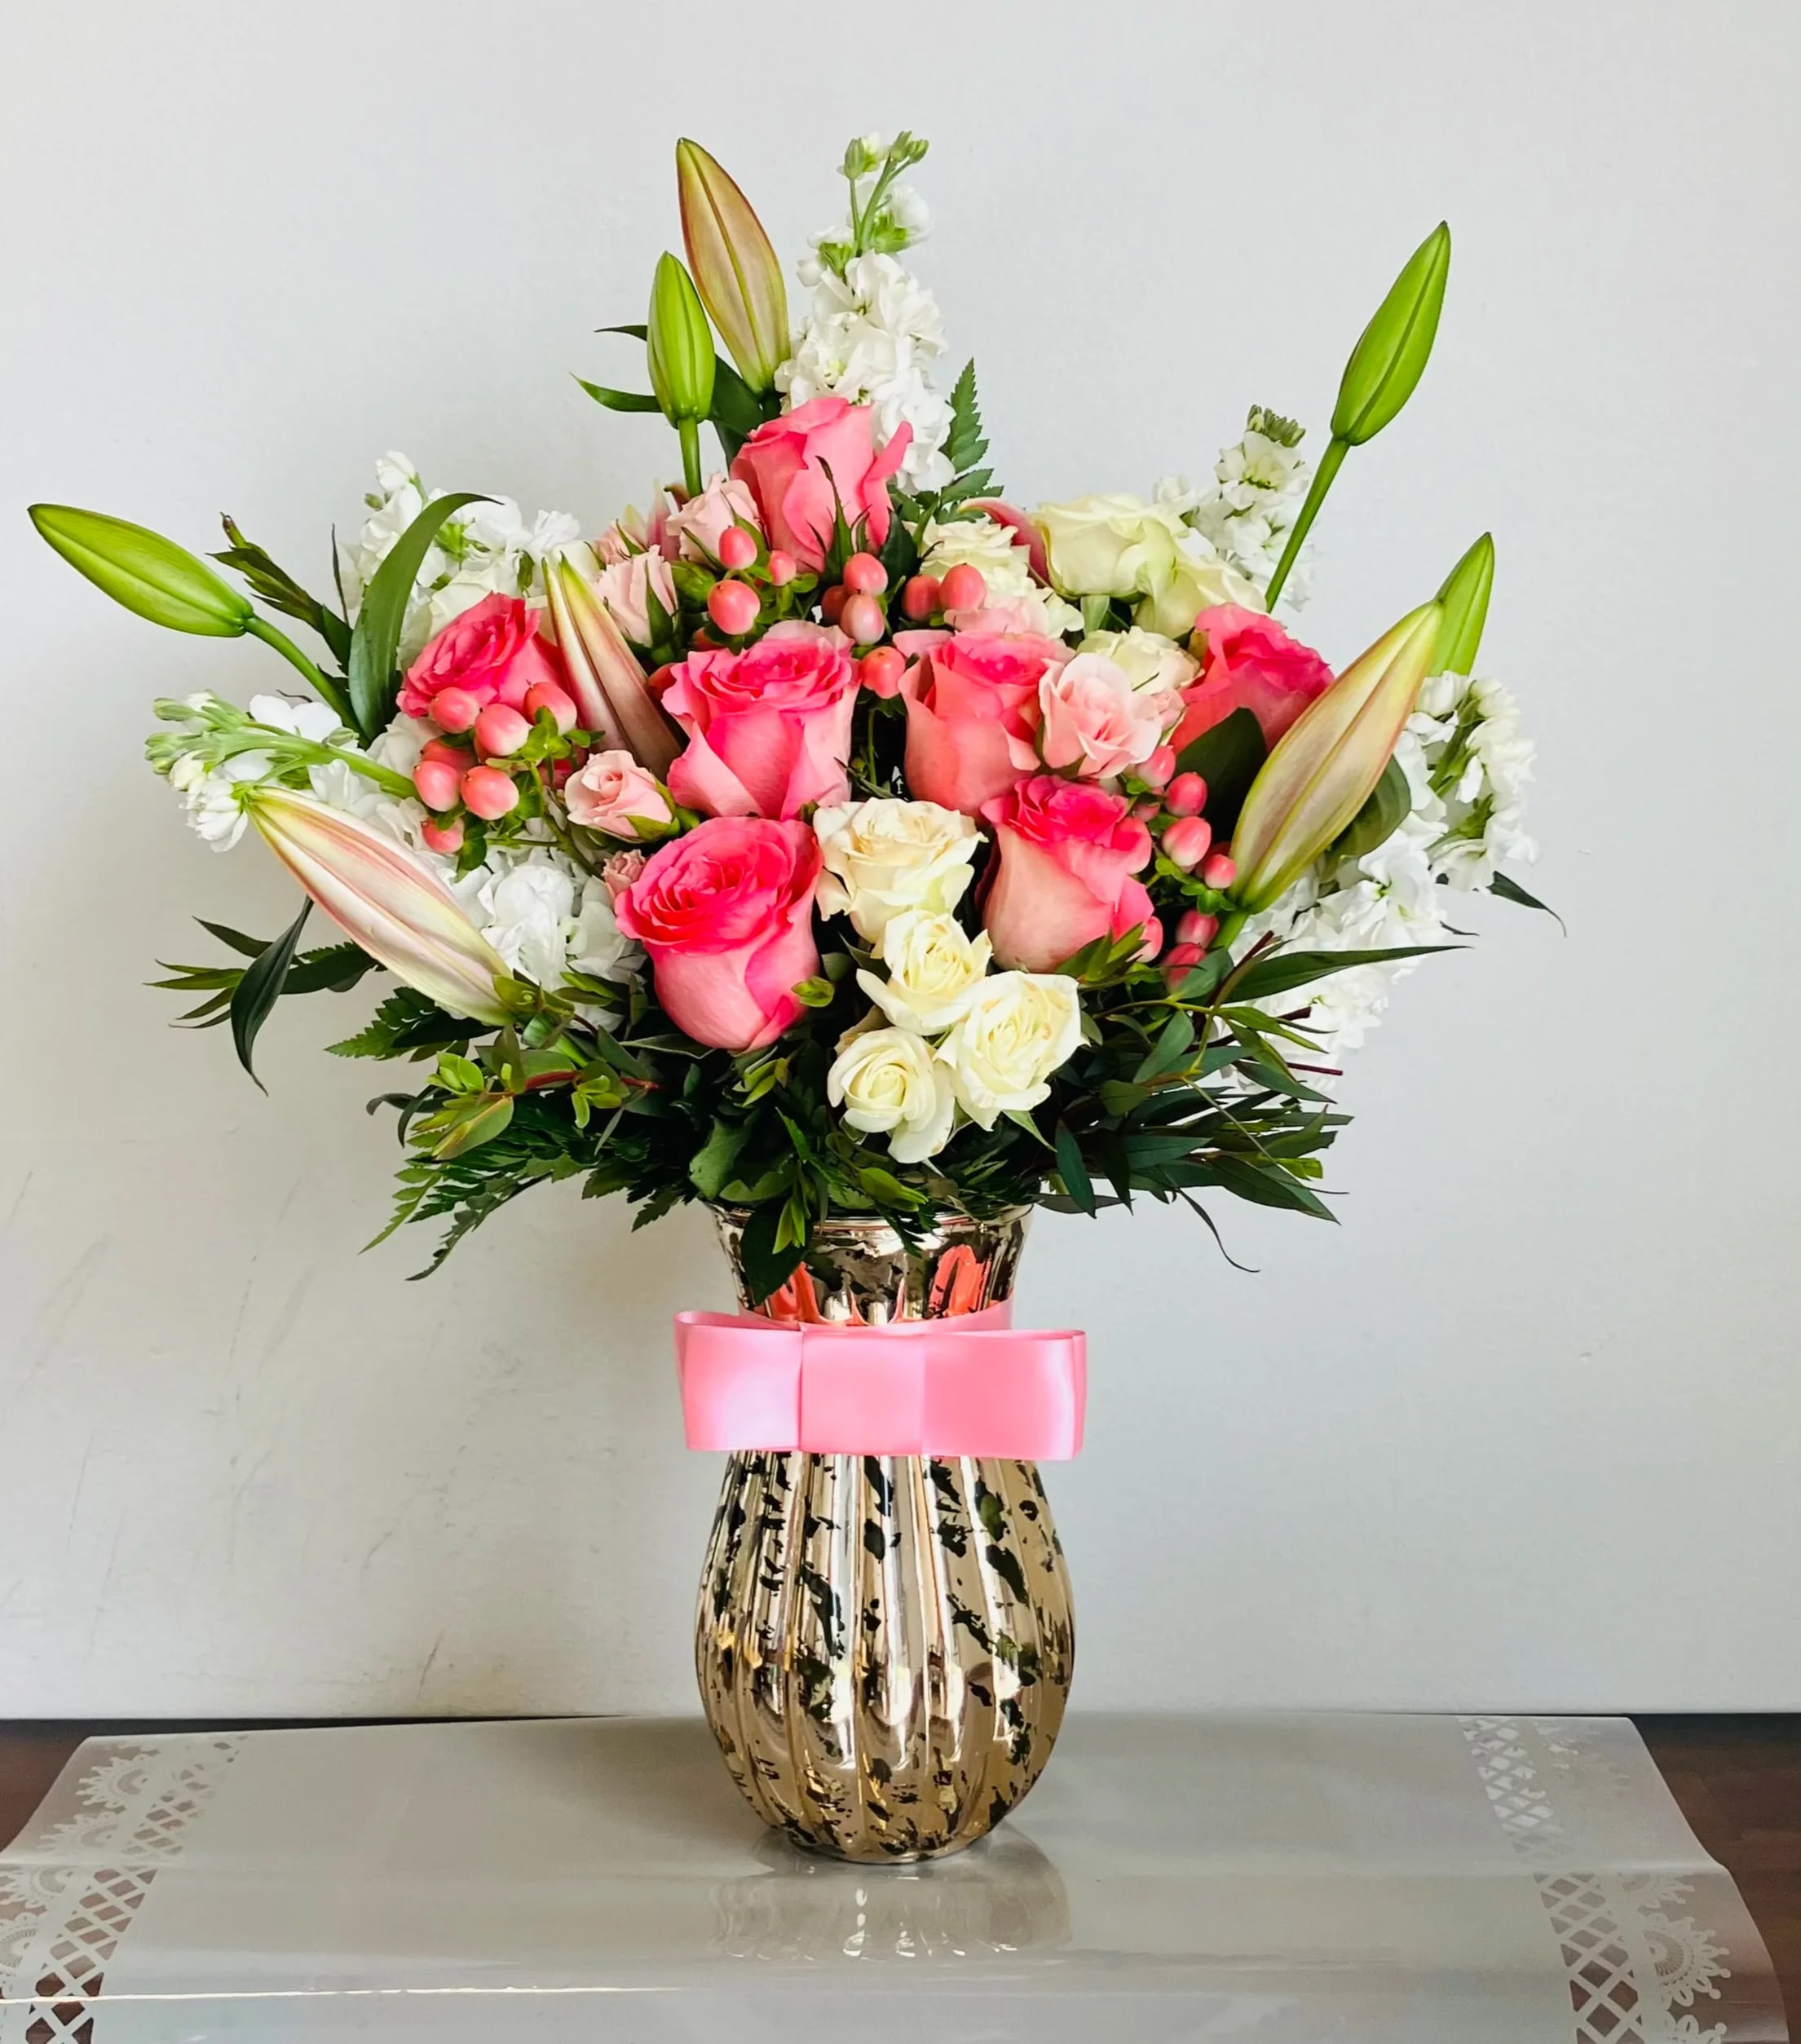 Blush Beauty - Send your Mother this elegant design this Mother's Day. Arranged in a Unique Iridescent Gold Vase, Hydrangeas, Roses, Lisianthus, Spray Roses and Eucalyptus burst out with love. This arrangement is truly one of a kind! 